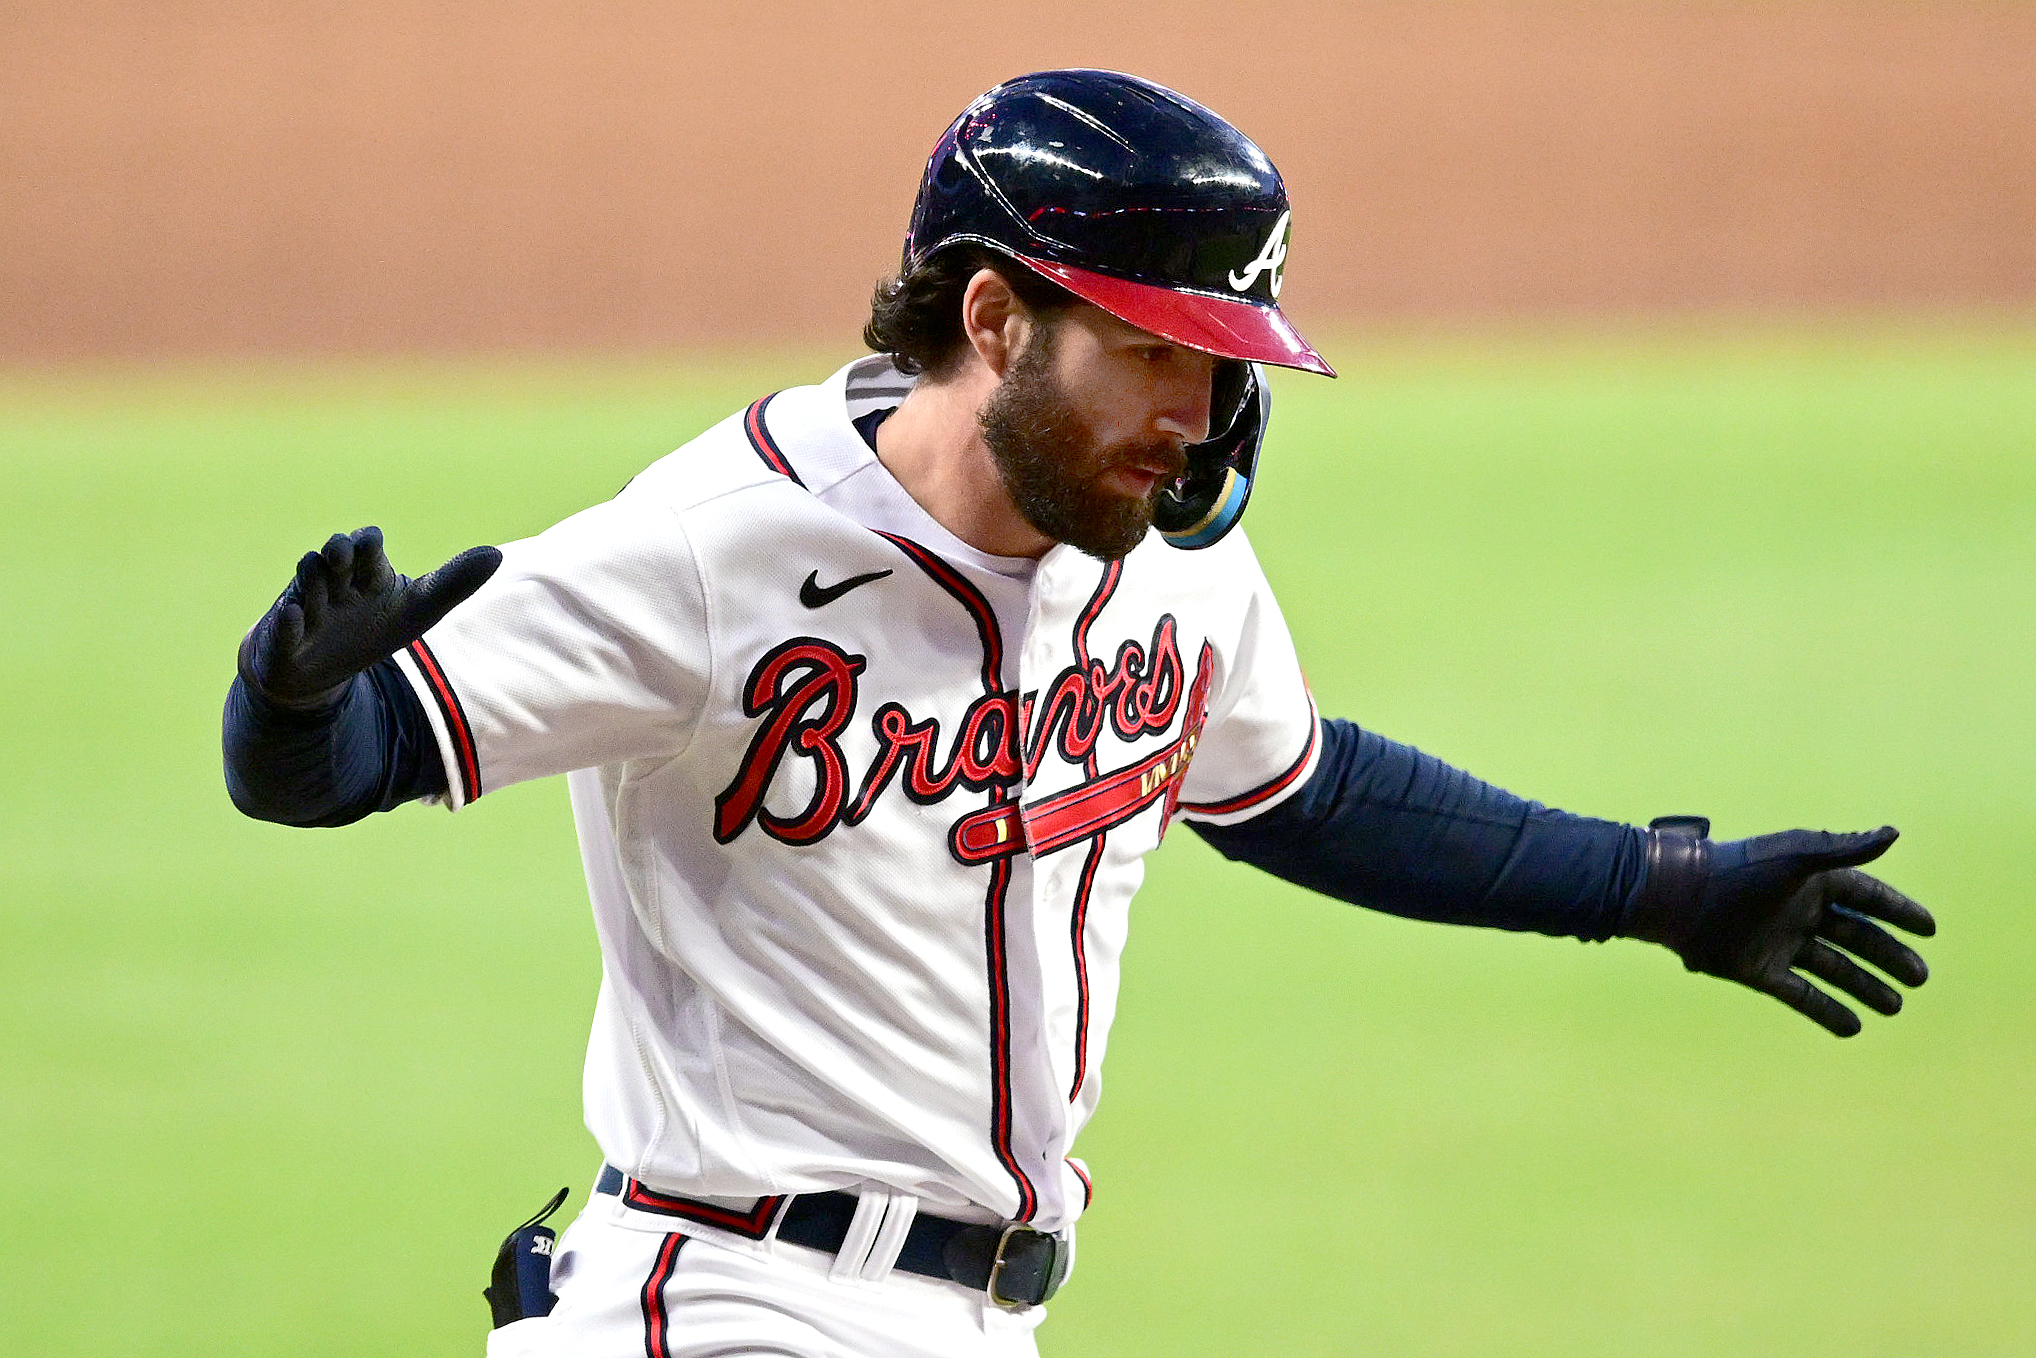 Braves: While MLB Replay was Wrong, Dansby Swanson was Right